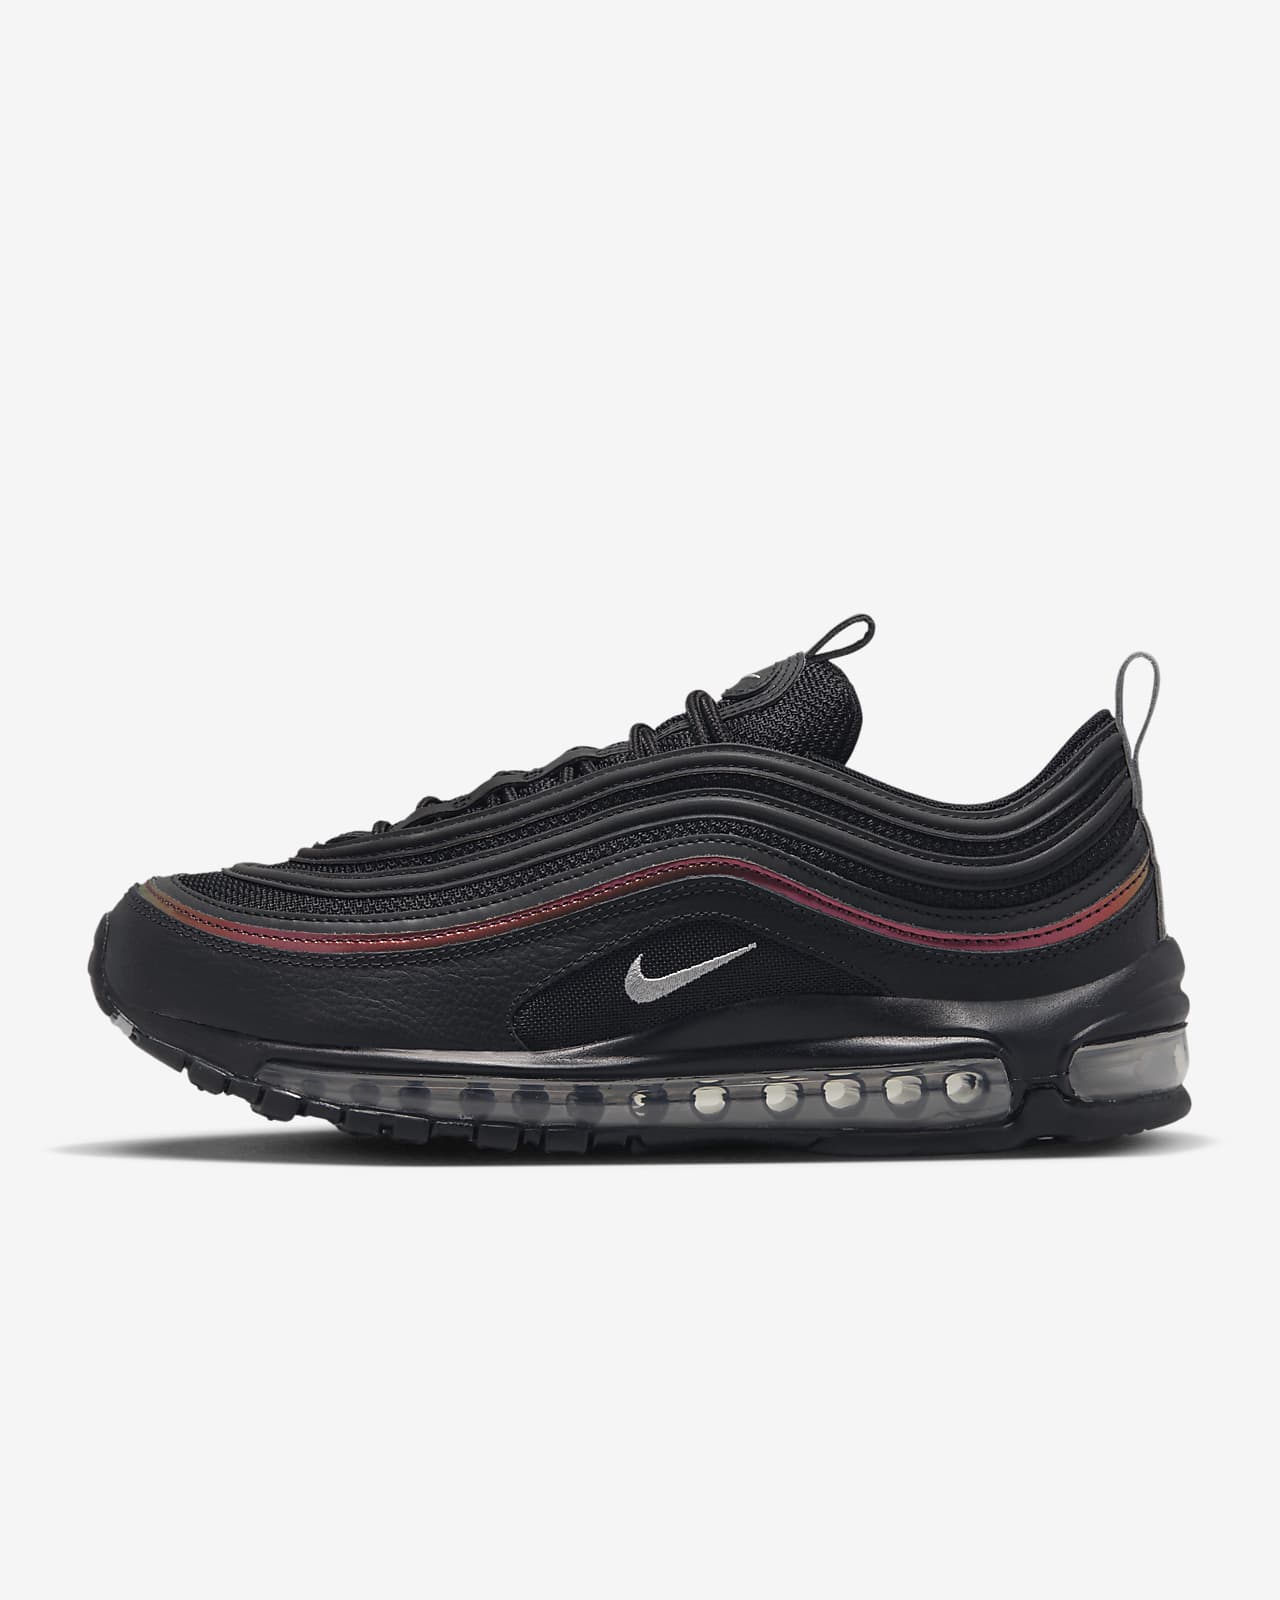 Chaussure Nike Air 97 pour Nike BE